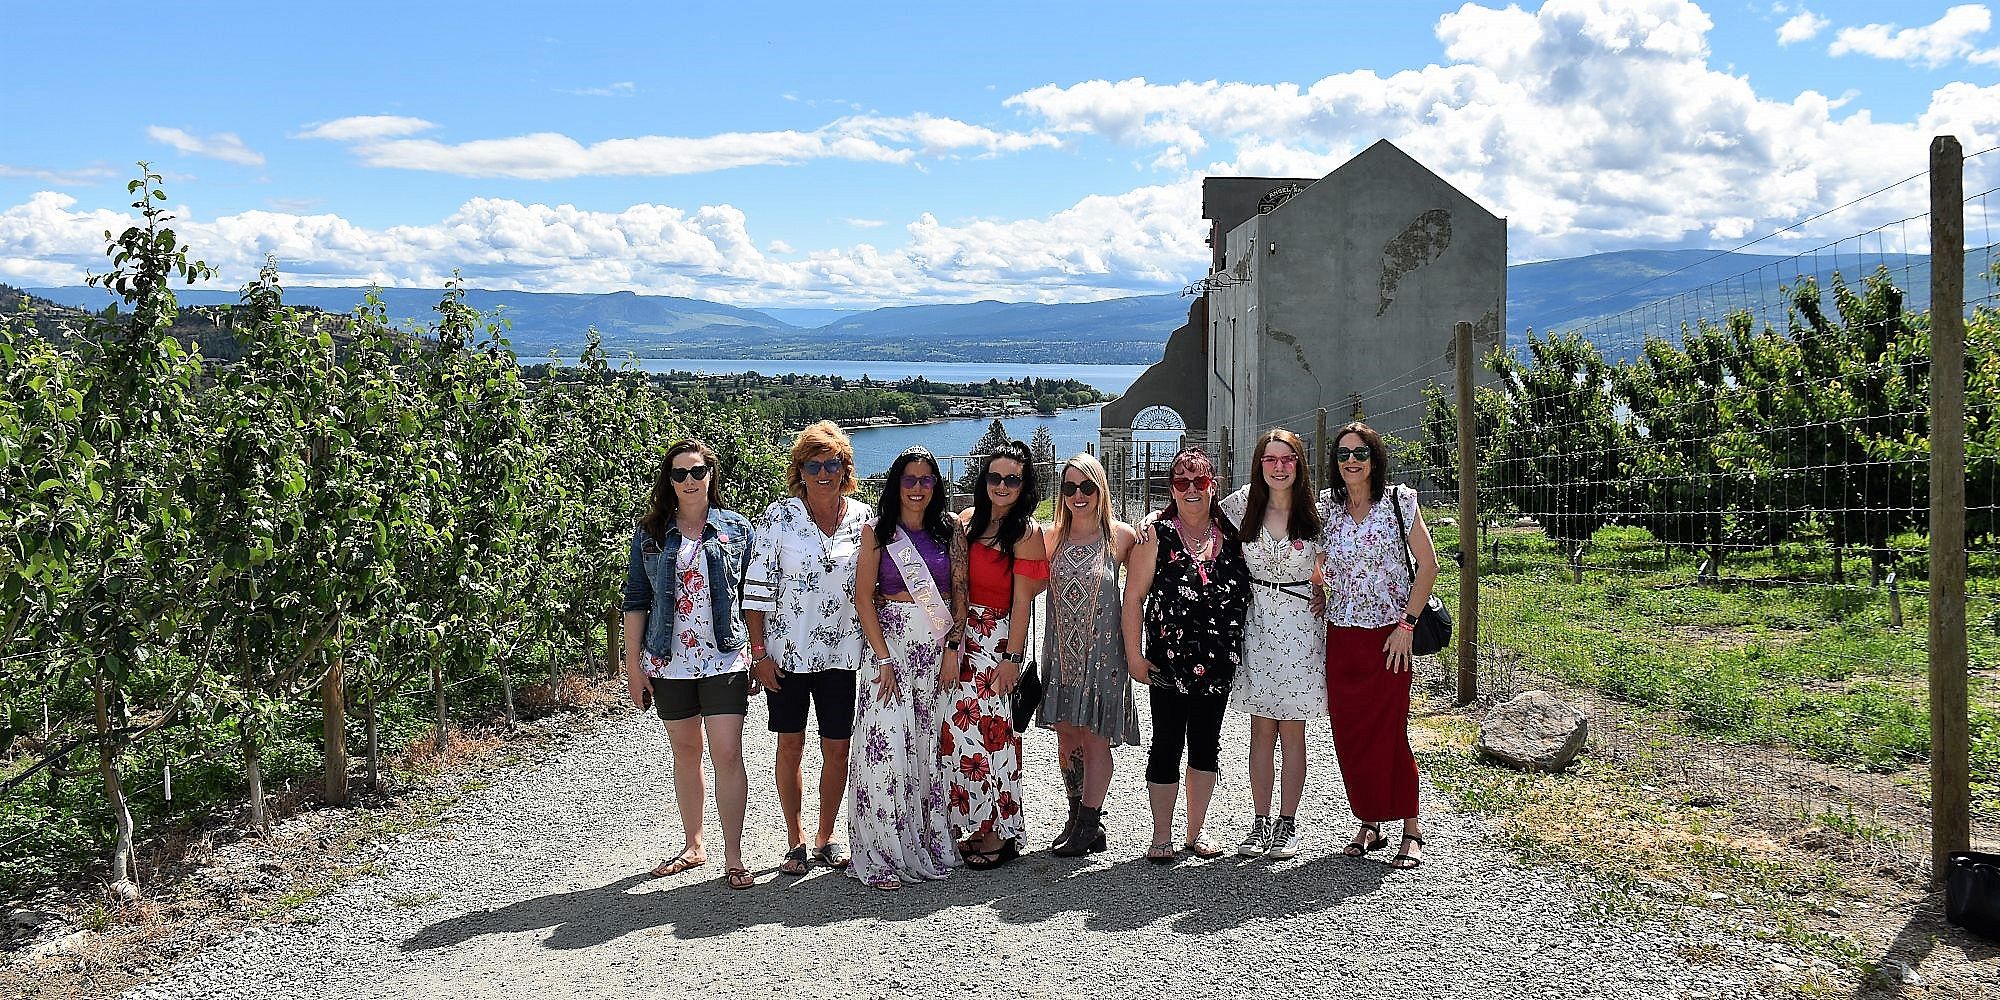 Bridal Party of Eight Standing In Front Of The Crown & Thieves Winery Ruined Castle